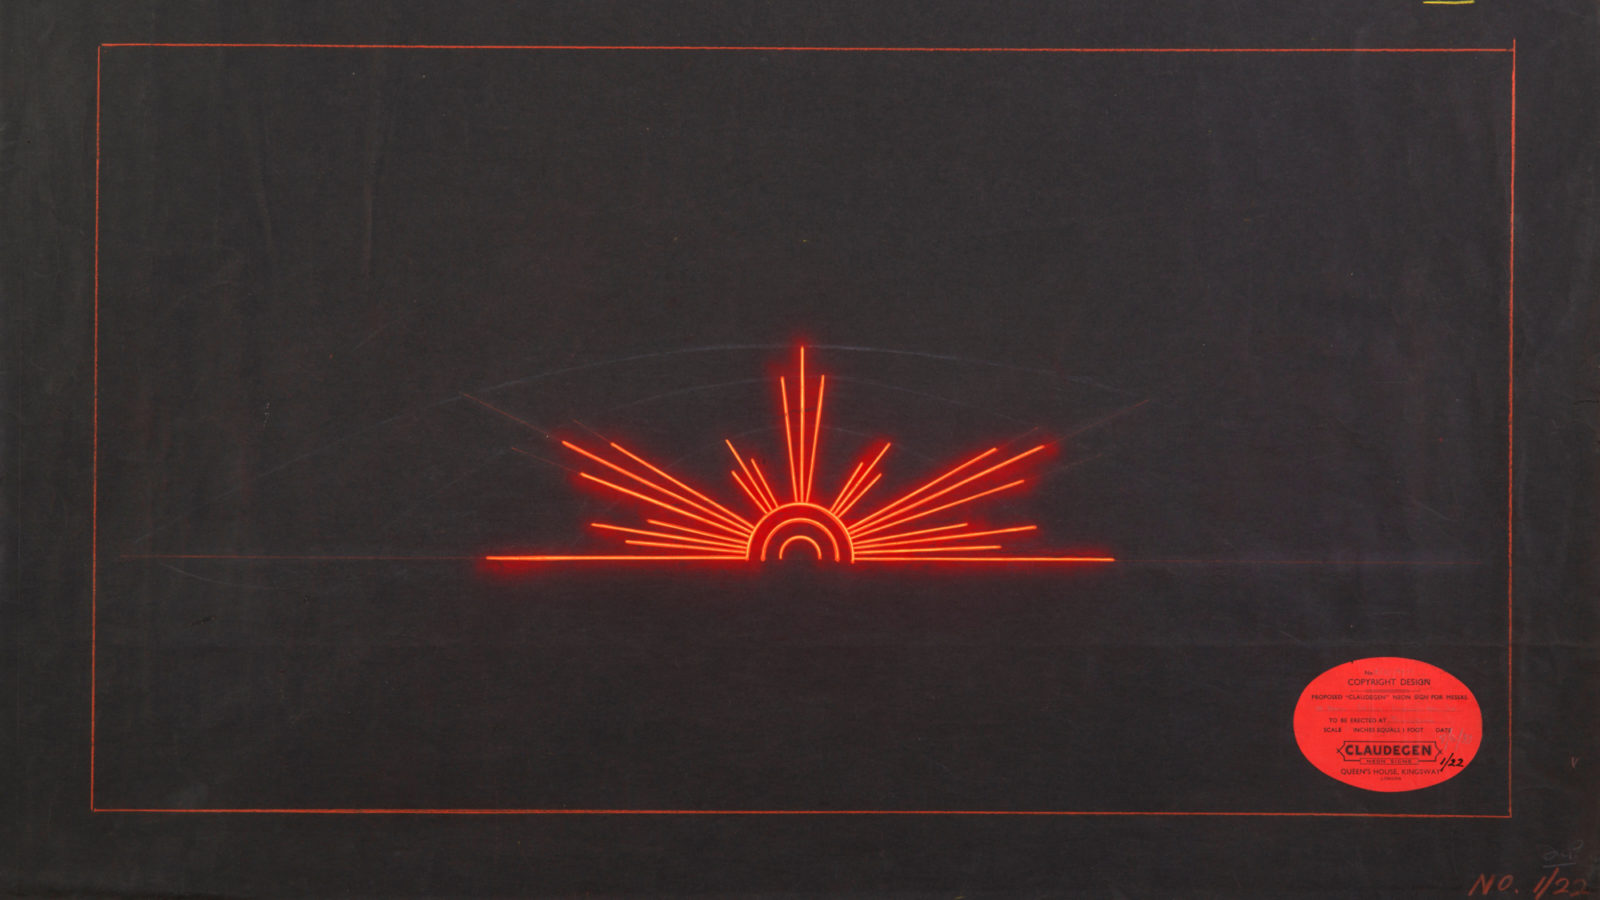 Concept design on black paper for a neon installations of a half sun burst in red